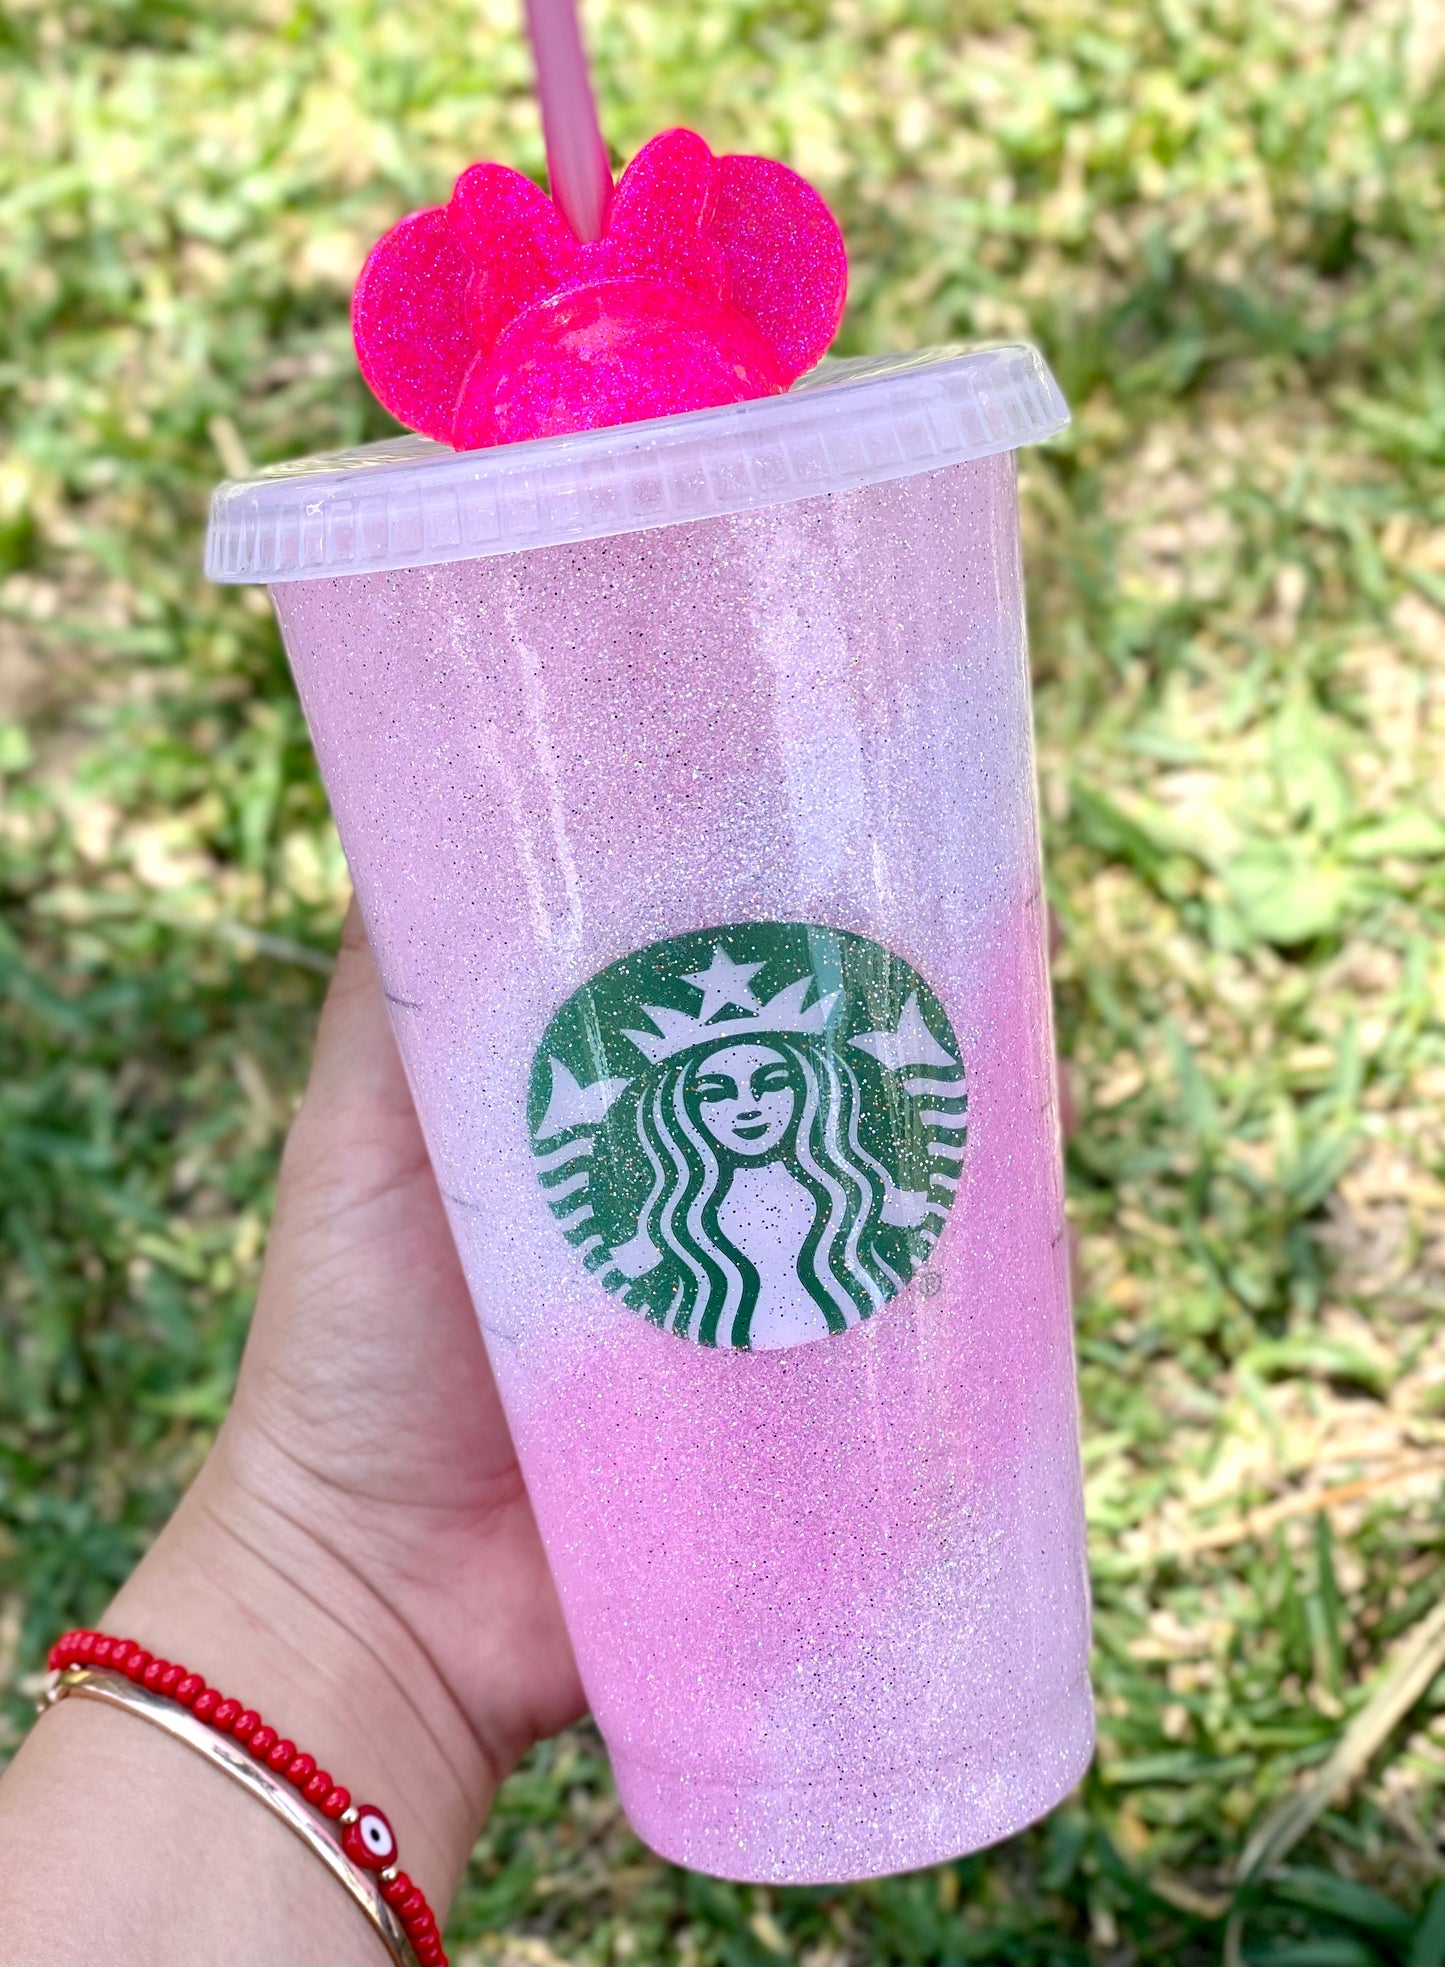 Pink Swirl Starbucks Reusable Cup with Straw Topper